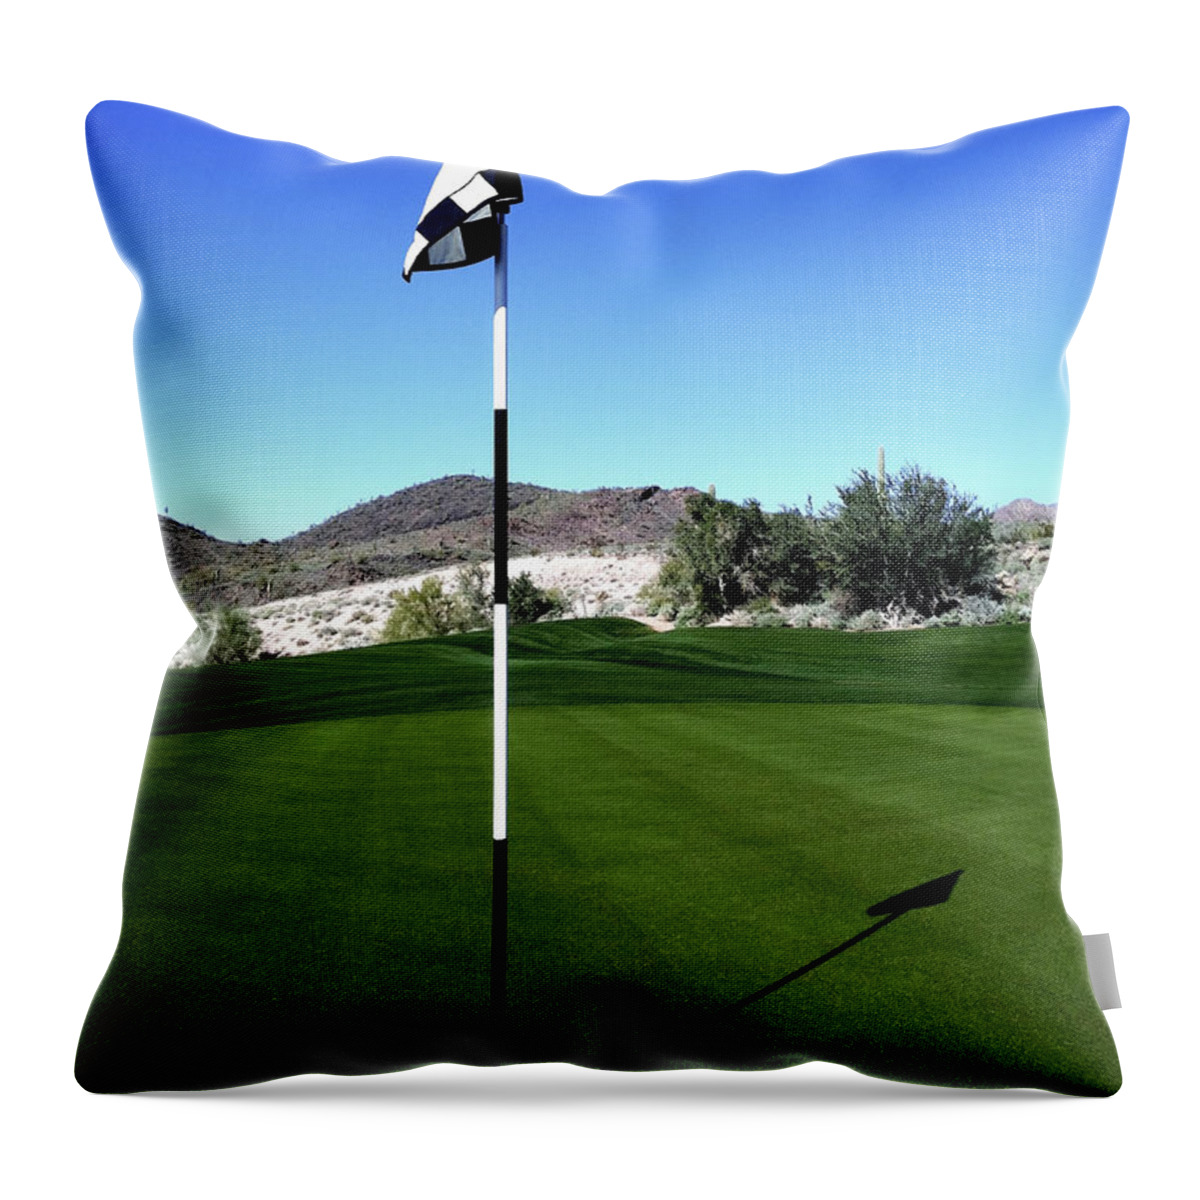 Activity Throw Pillow featuring the photograph Putting Green and Flag on Golf Course by Bryan Mullennix